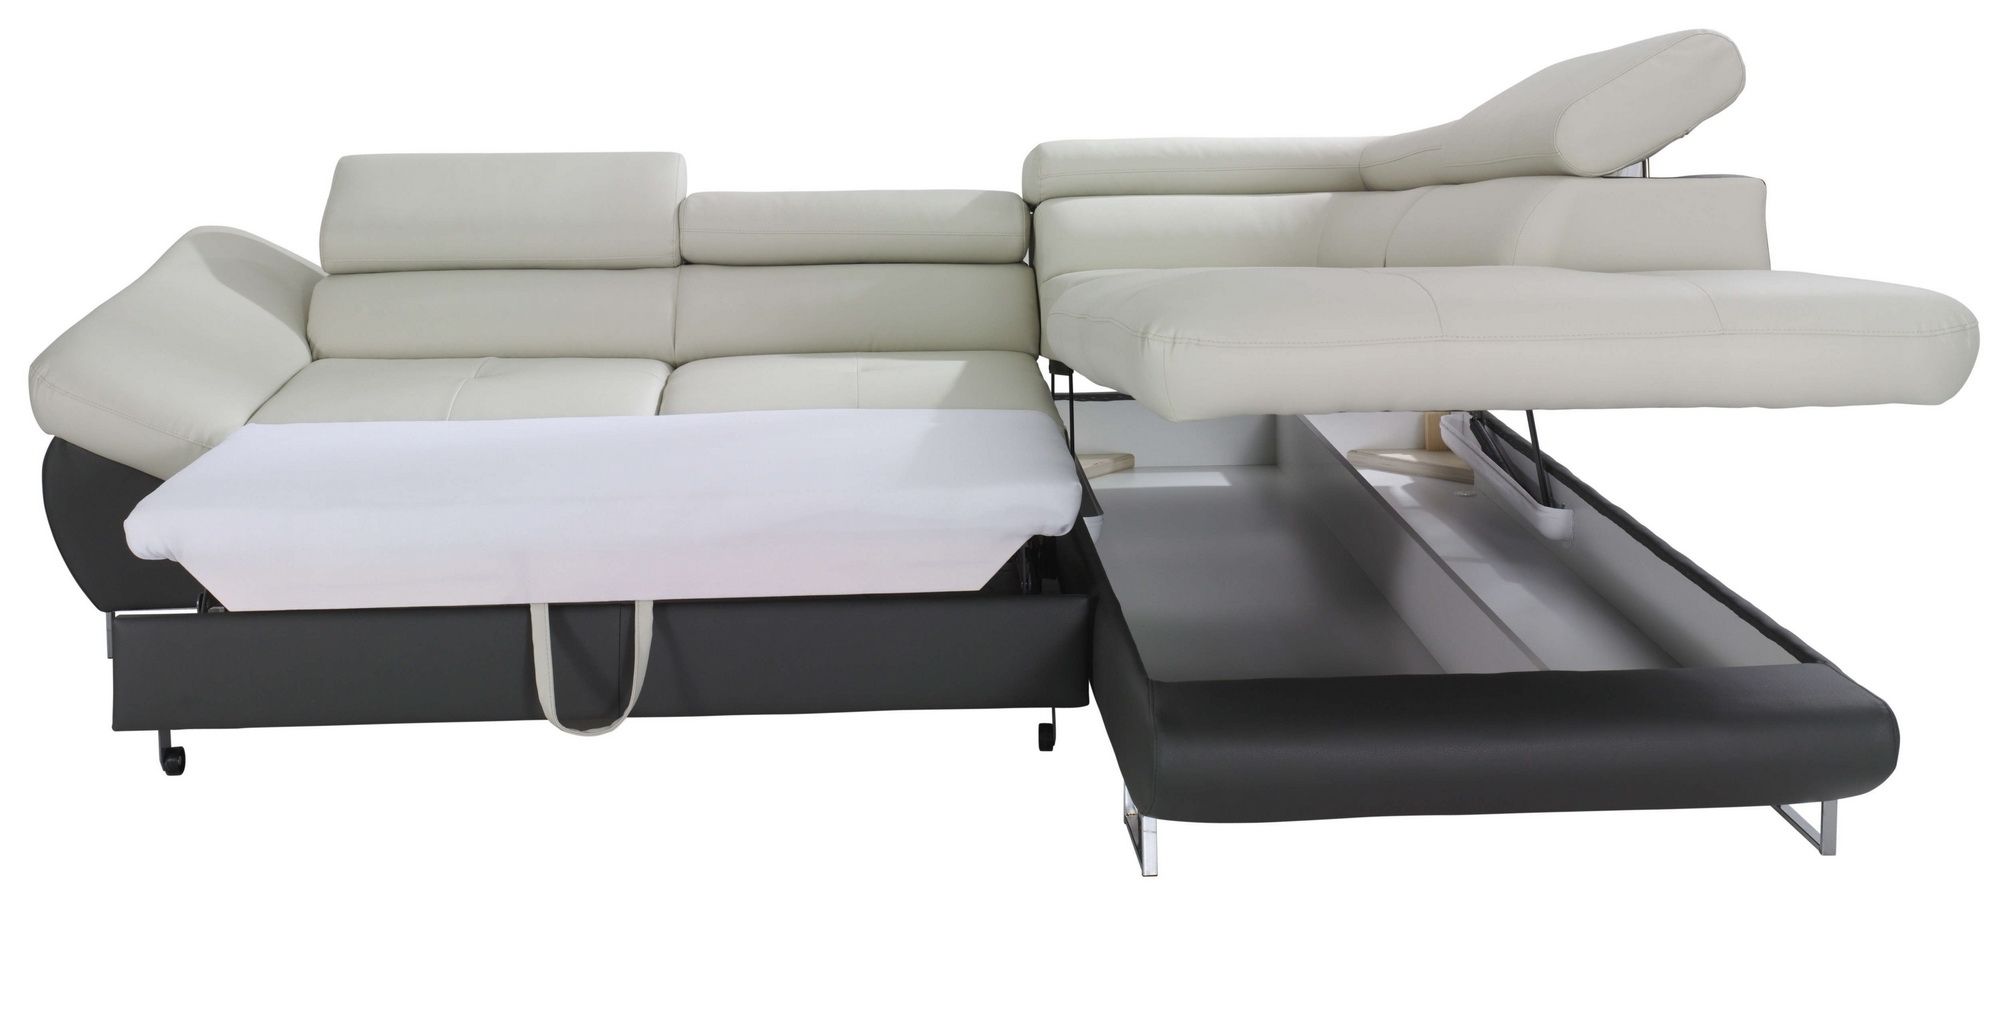 Fabio Sectional Sofa Sleeper With Storage, Creative Furniture In Newest Sectional Sofas With Storage (View 1 of 15)